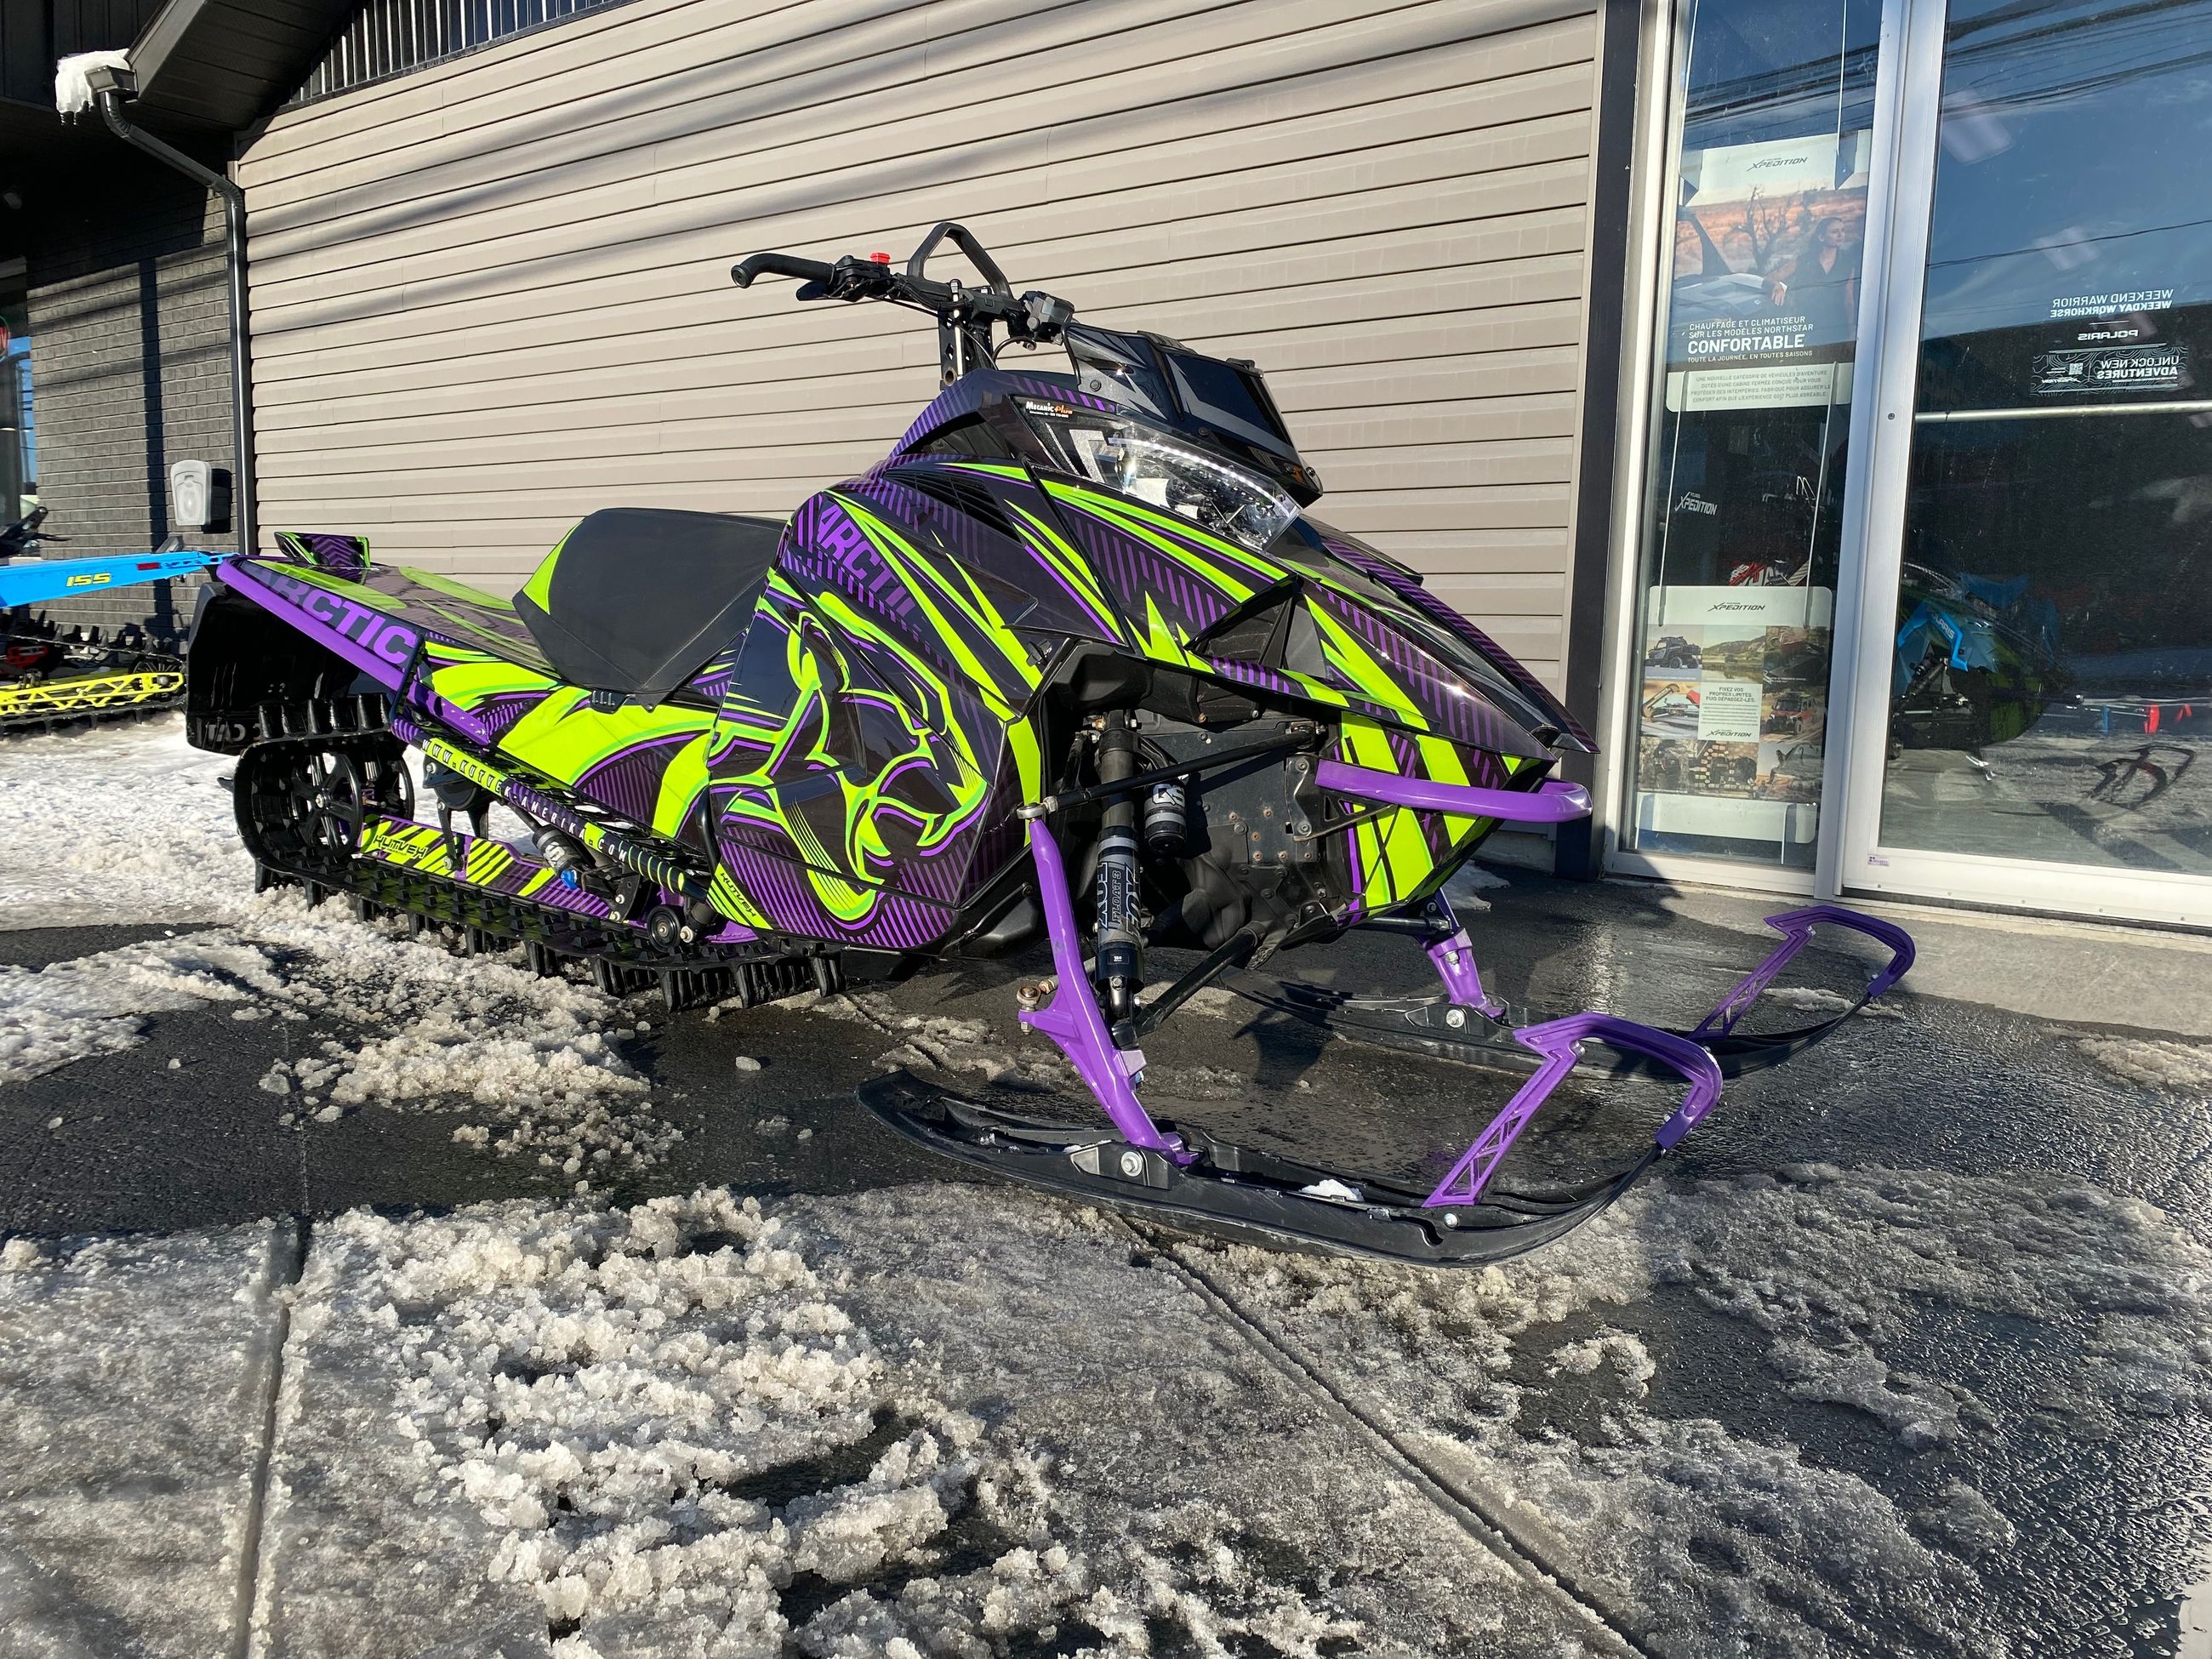 Arctic Cat MOUNTAIN CAT M8 ALPHA ONE 154 3'' DEMO 842 KM 46 HOURS ONLY!!! 2019